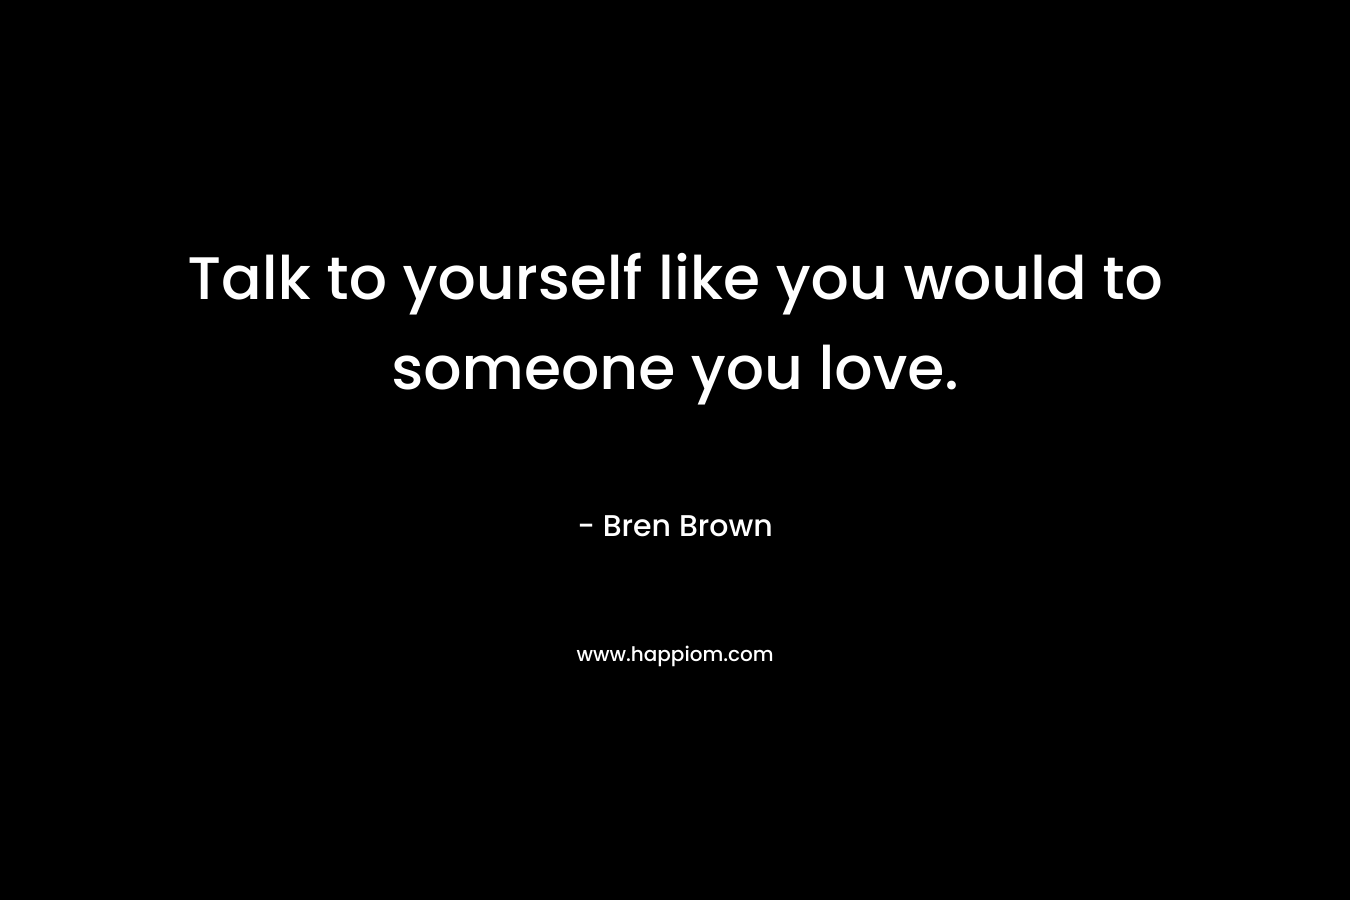 Talk to yourself like you would to someone you love. – Bren Brown